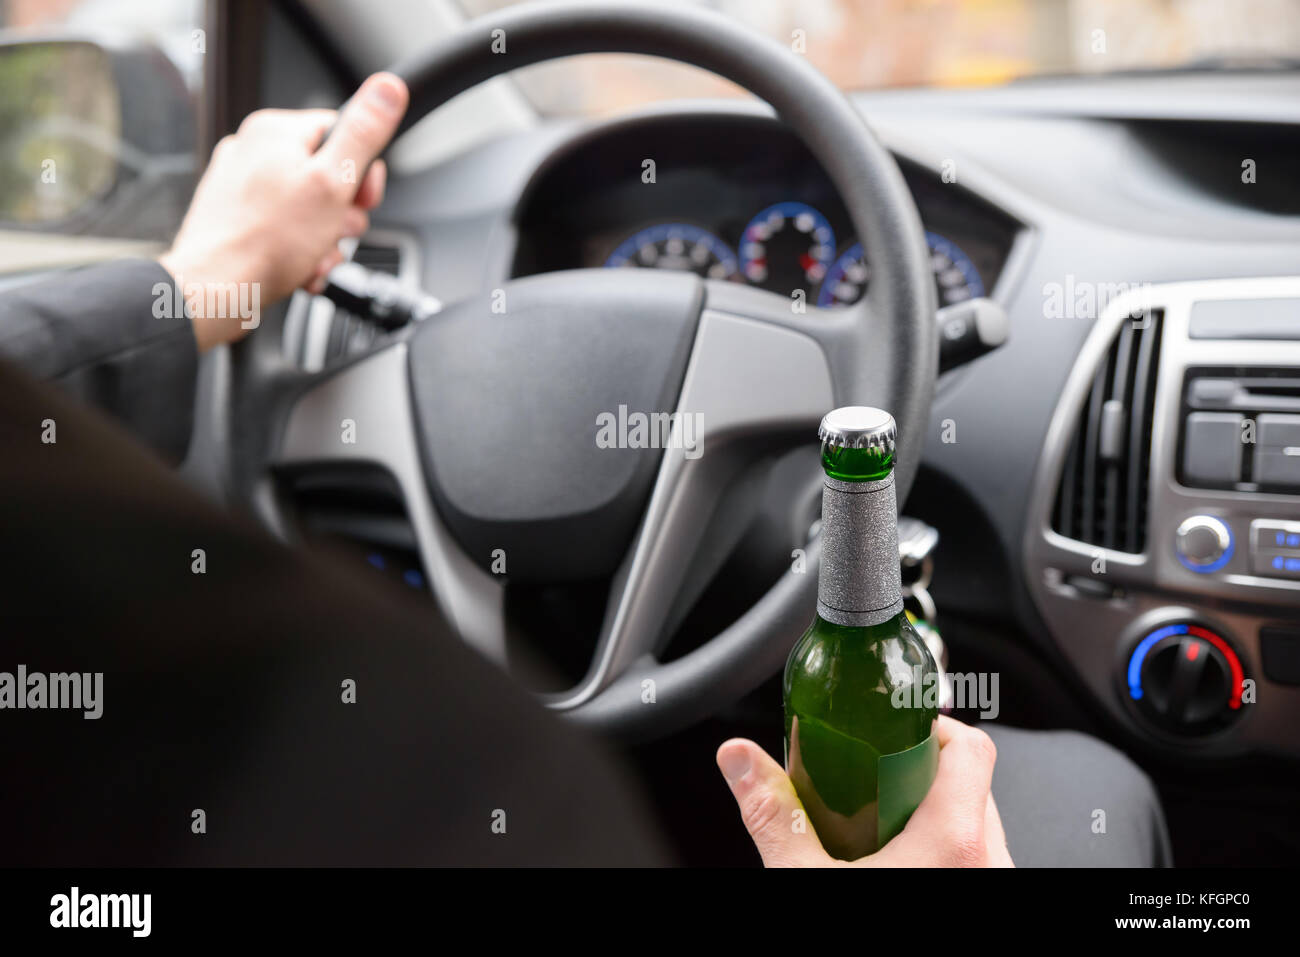 Close-up Of Man Holding Beer Bottle While Driving Car Stock Photo